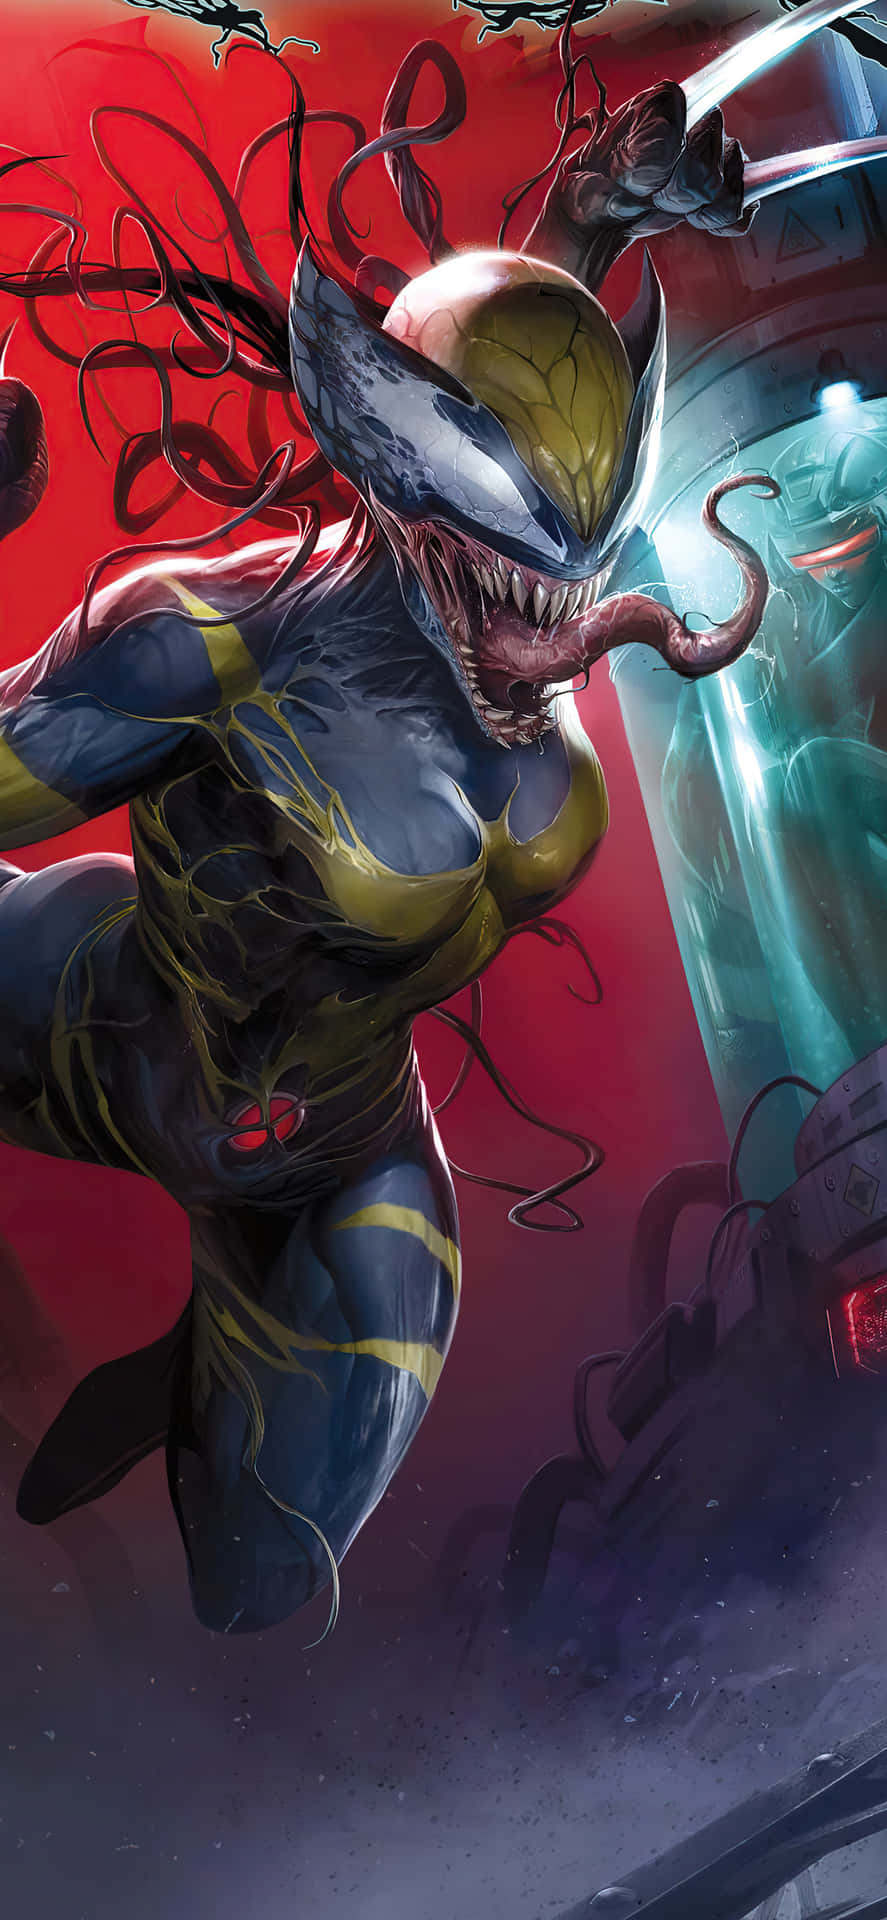 Ferocious Venomverse Characters in Action Wallpaper